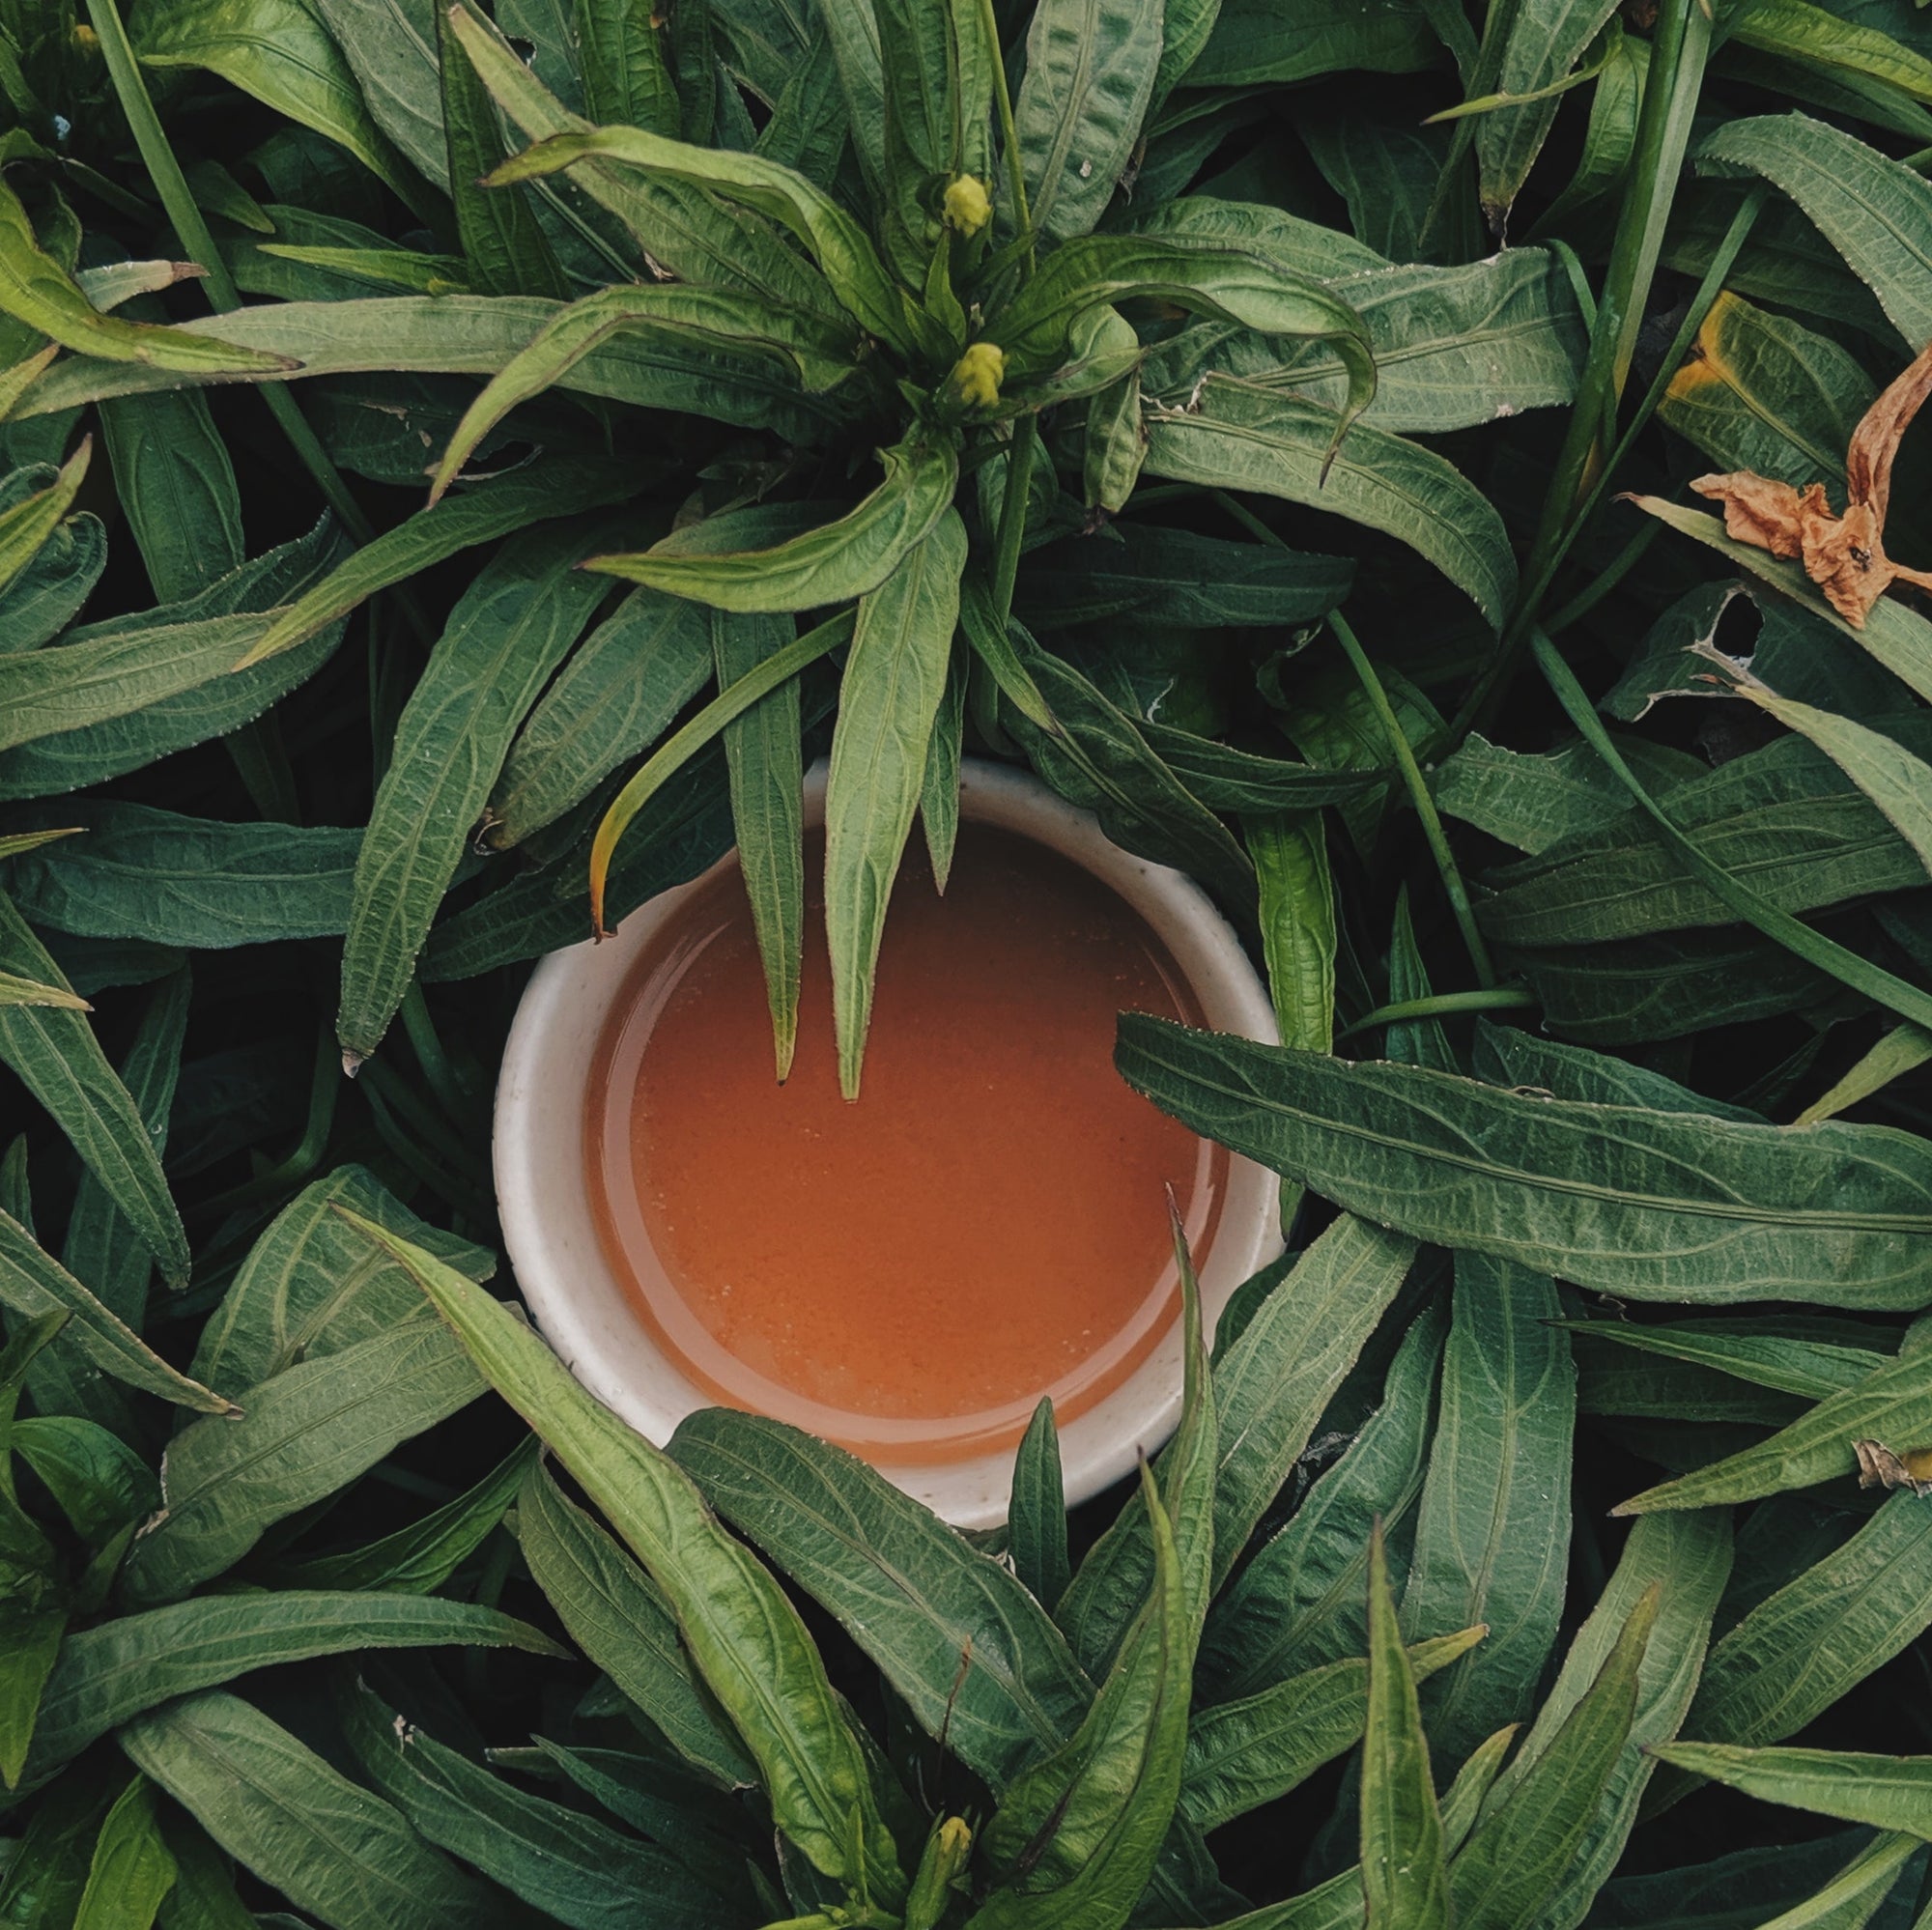 Tea 101: All About Tea and Its Benefits